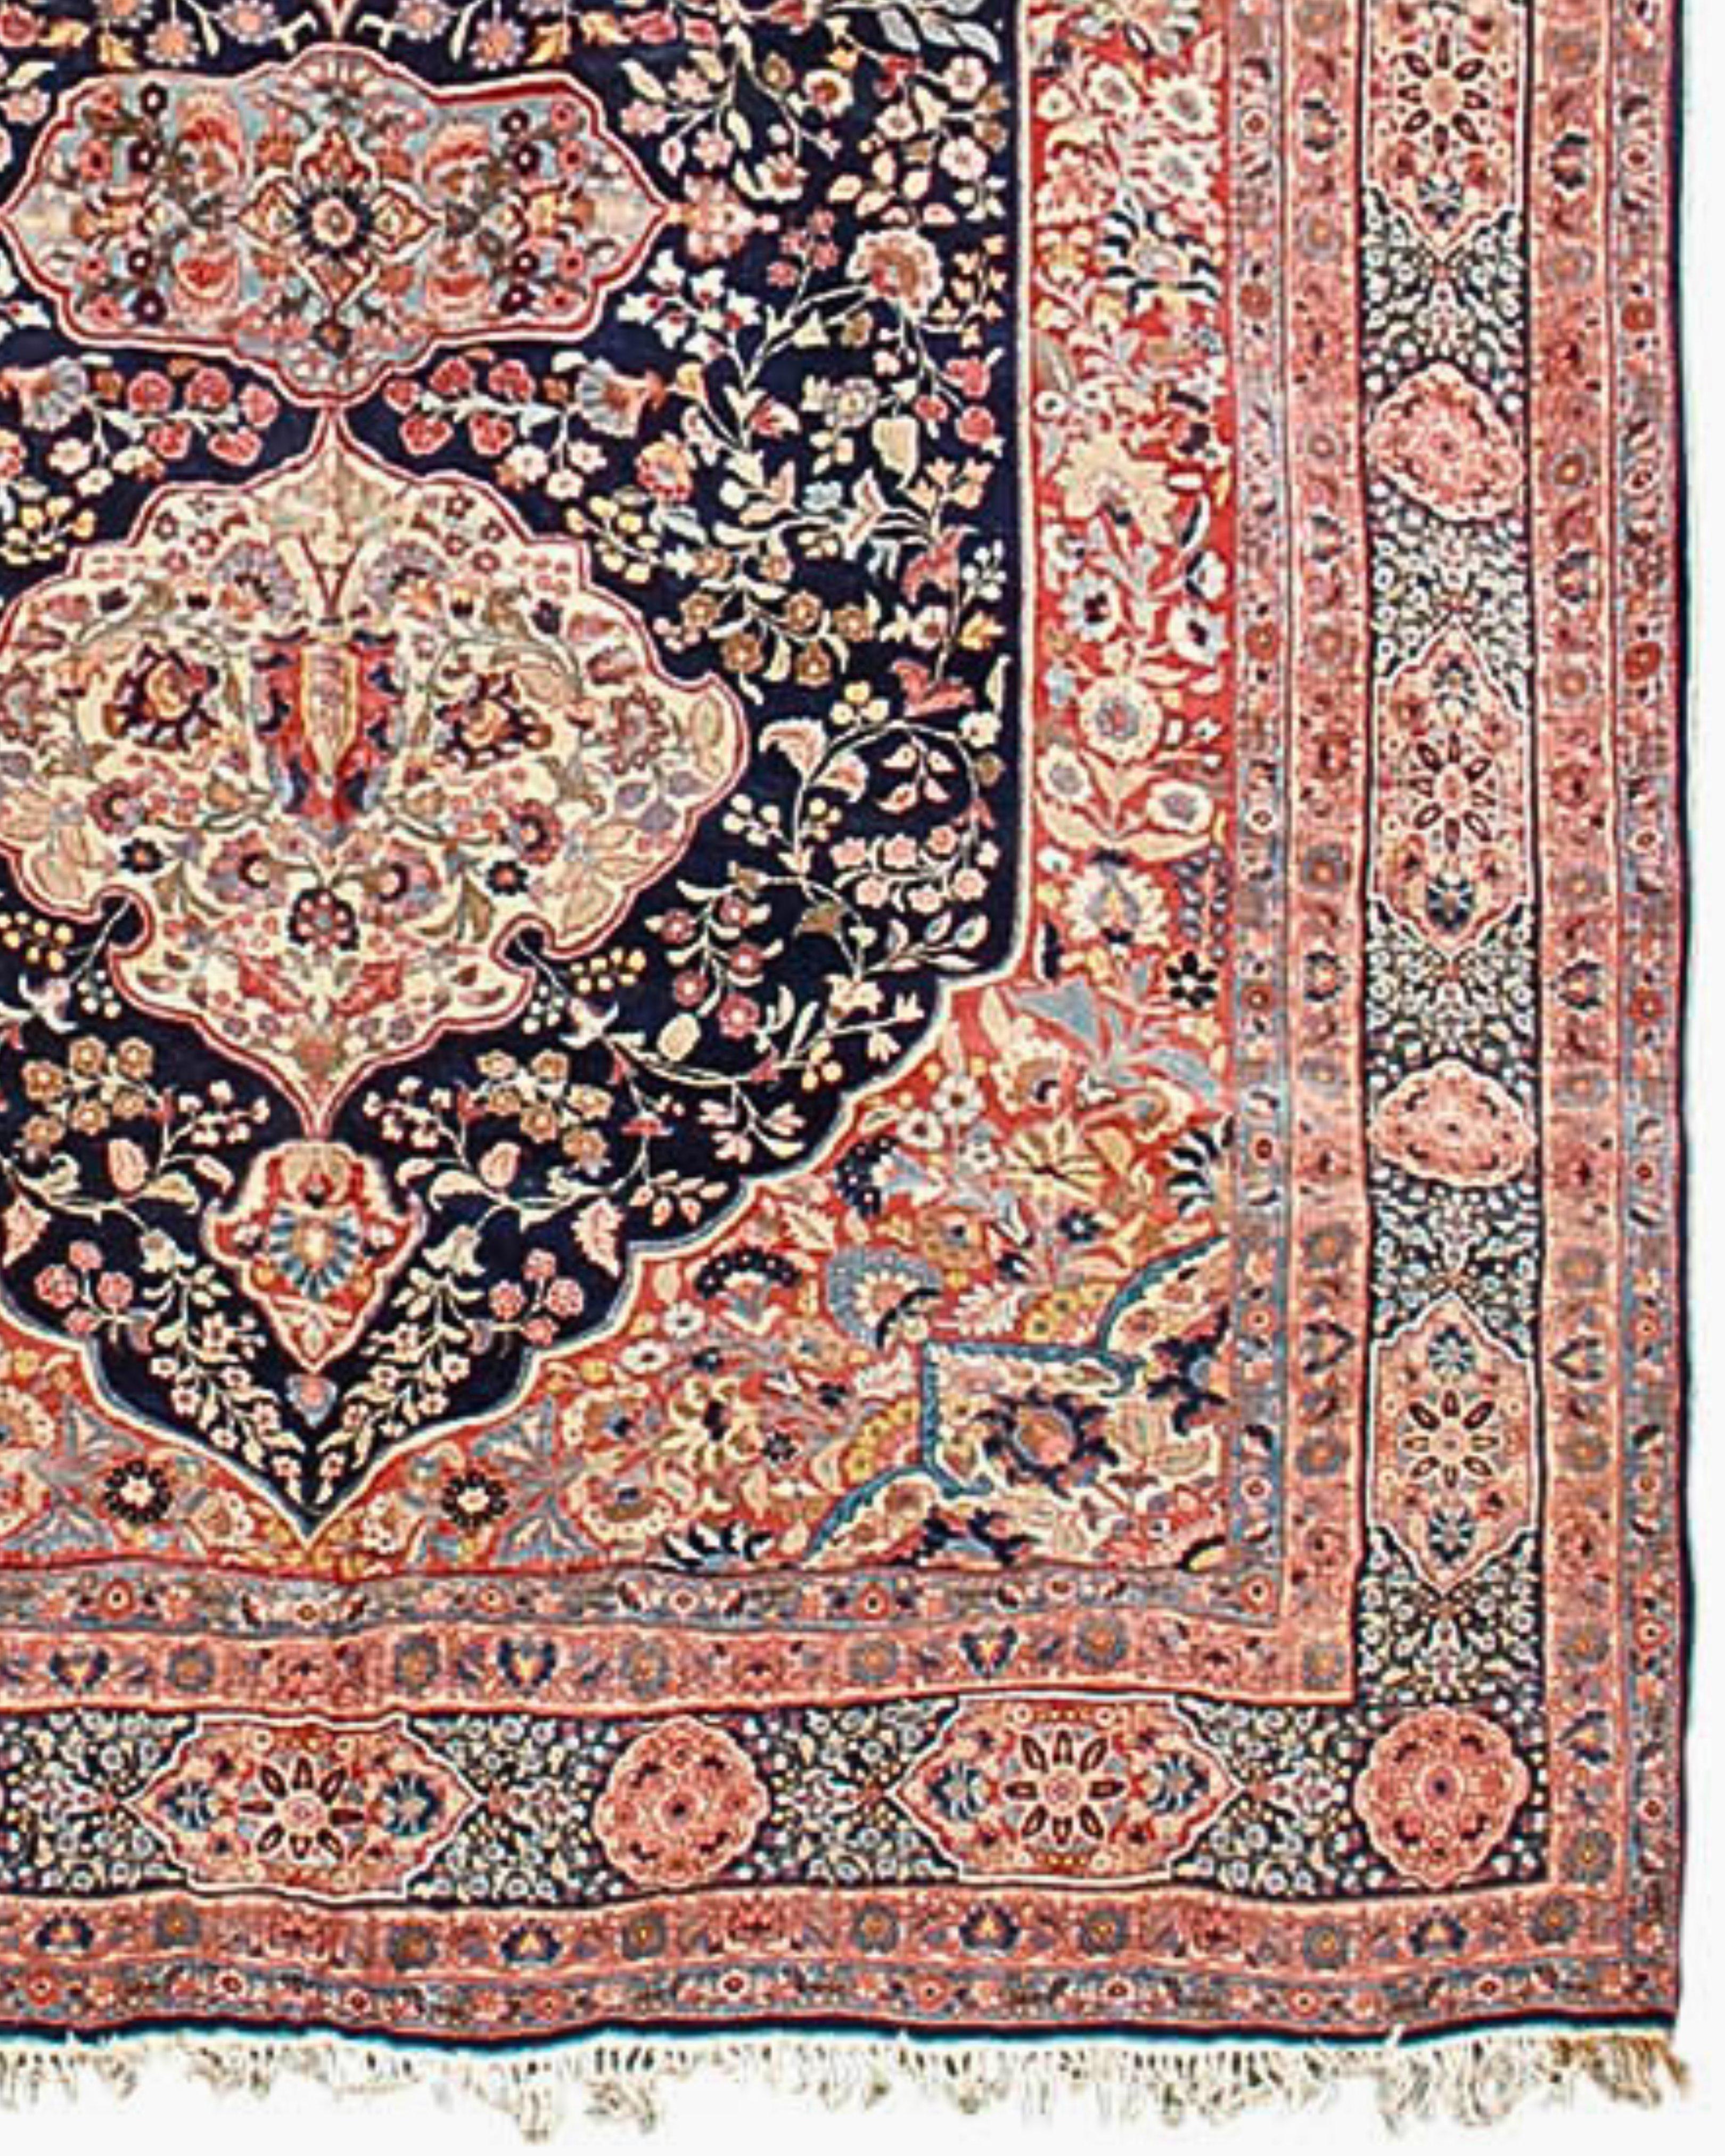 Antique Large Tabriz Rug, 19th Century In Excellent Condition For Sale In San Francisco, CA